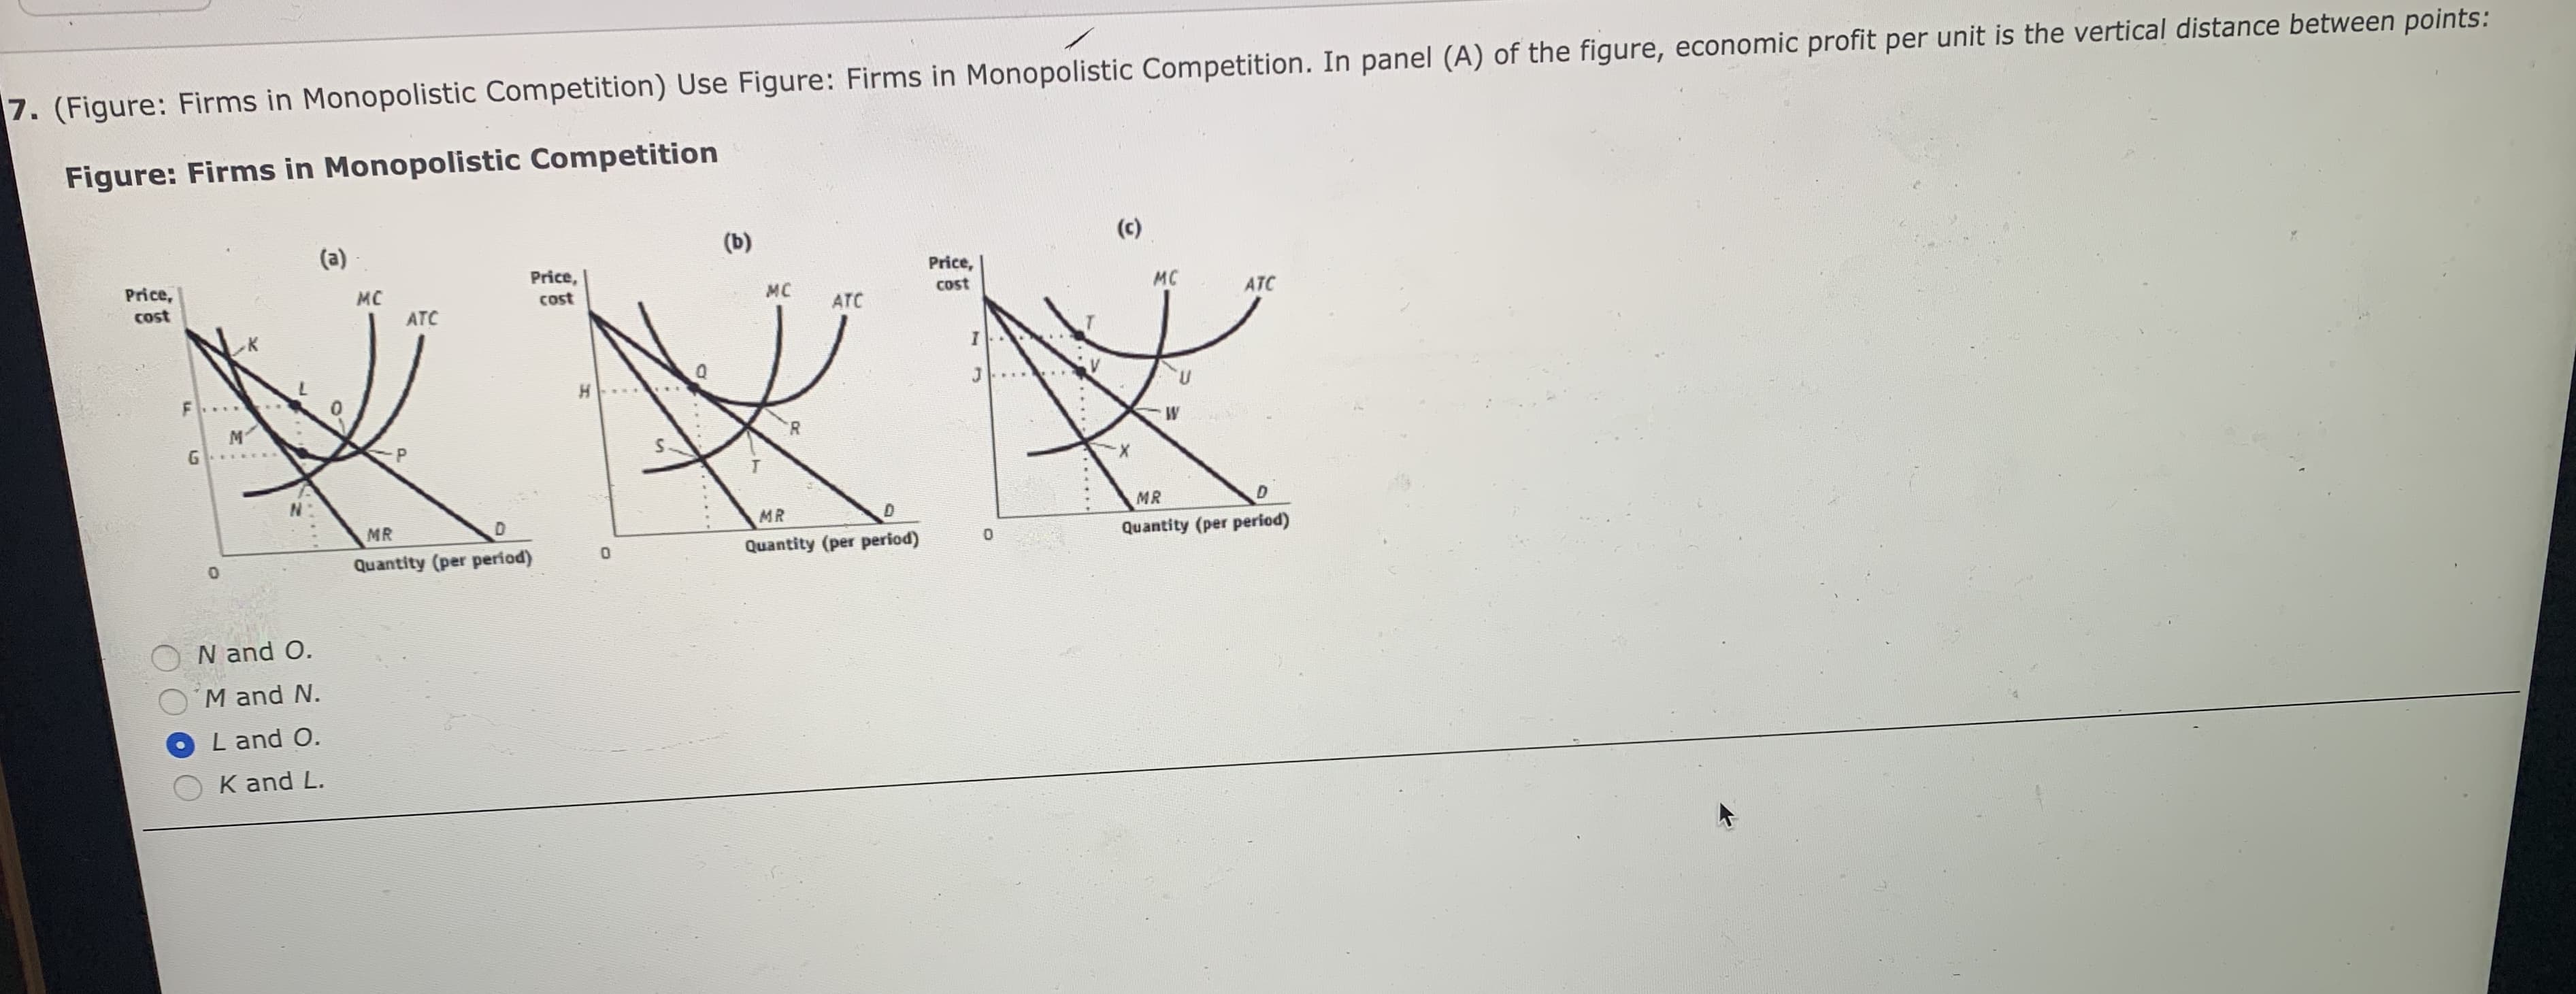 7. (Figure: Firms in Monopolistic Competition) Use Figure: Firms in Monopolistic Competition. In panel (A) of the figure, economic profit per unit is the vertical distance between points:
Figure: Firms in Monopolistic Competition
(b)
(c)
(a)
Price,
Price,
cost
Price,
MC
MC
мC
Cost
cost
ATC
ATC
ATC
I
H
M
G
W
R
MR
MR
D
MR
Quantity (per period)
Quantity (per period)
Quantity (per period)
0
N and O.
M and N.
L and O
K and L.
